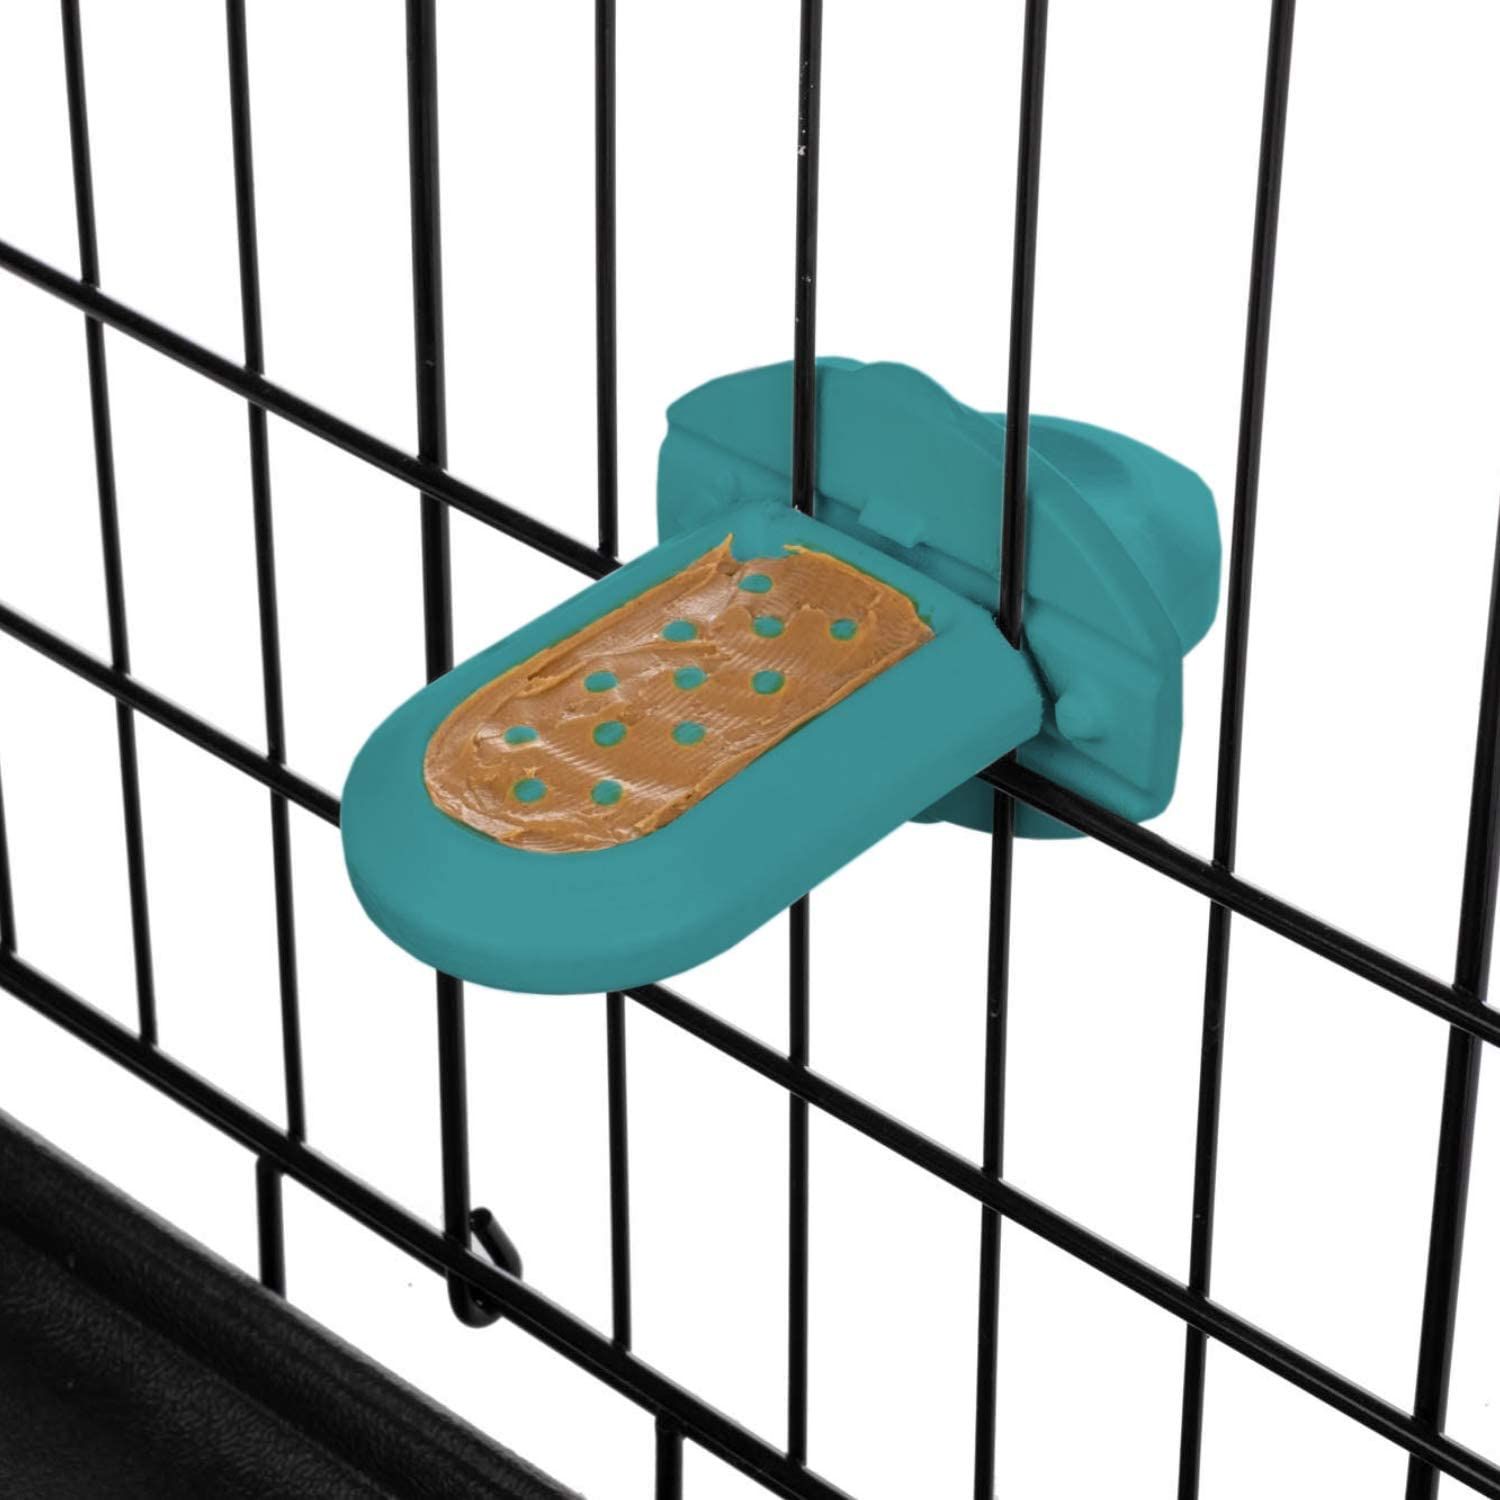 Diggs Groov Dog Crate Training Tool